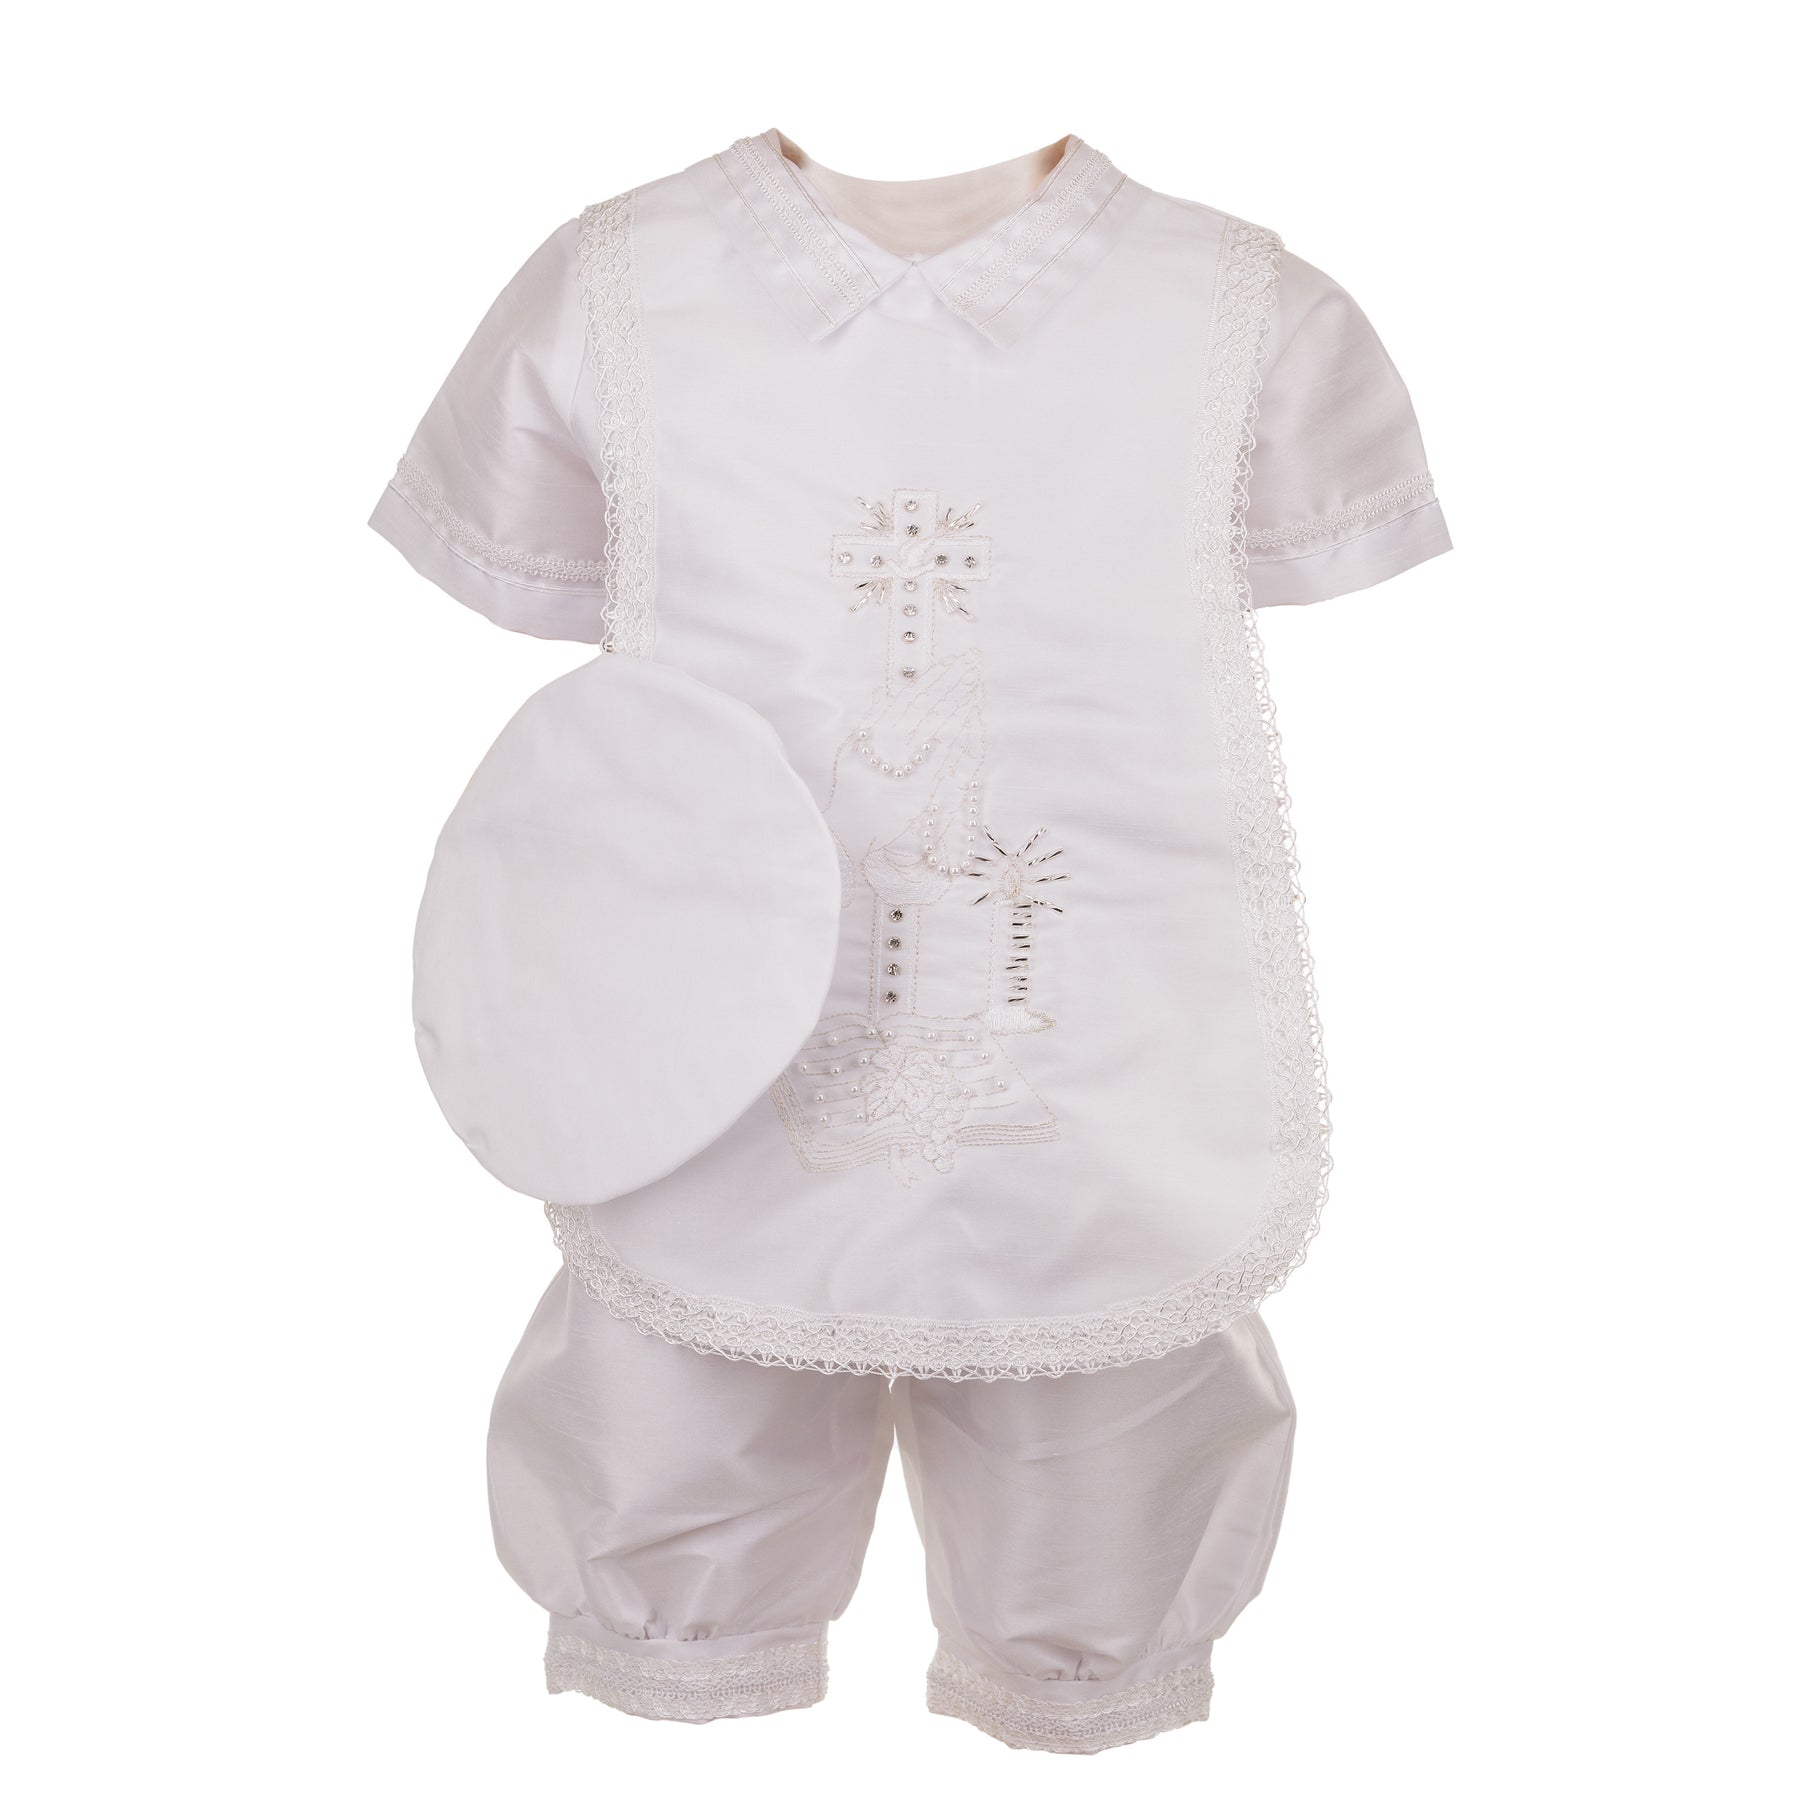 Buy Online Boys Baptism Outfit - 4-Piece Christening Set!